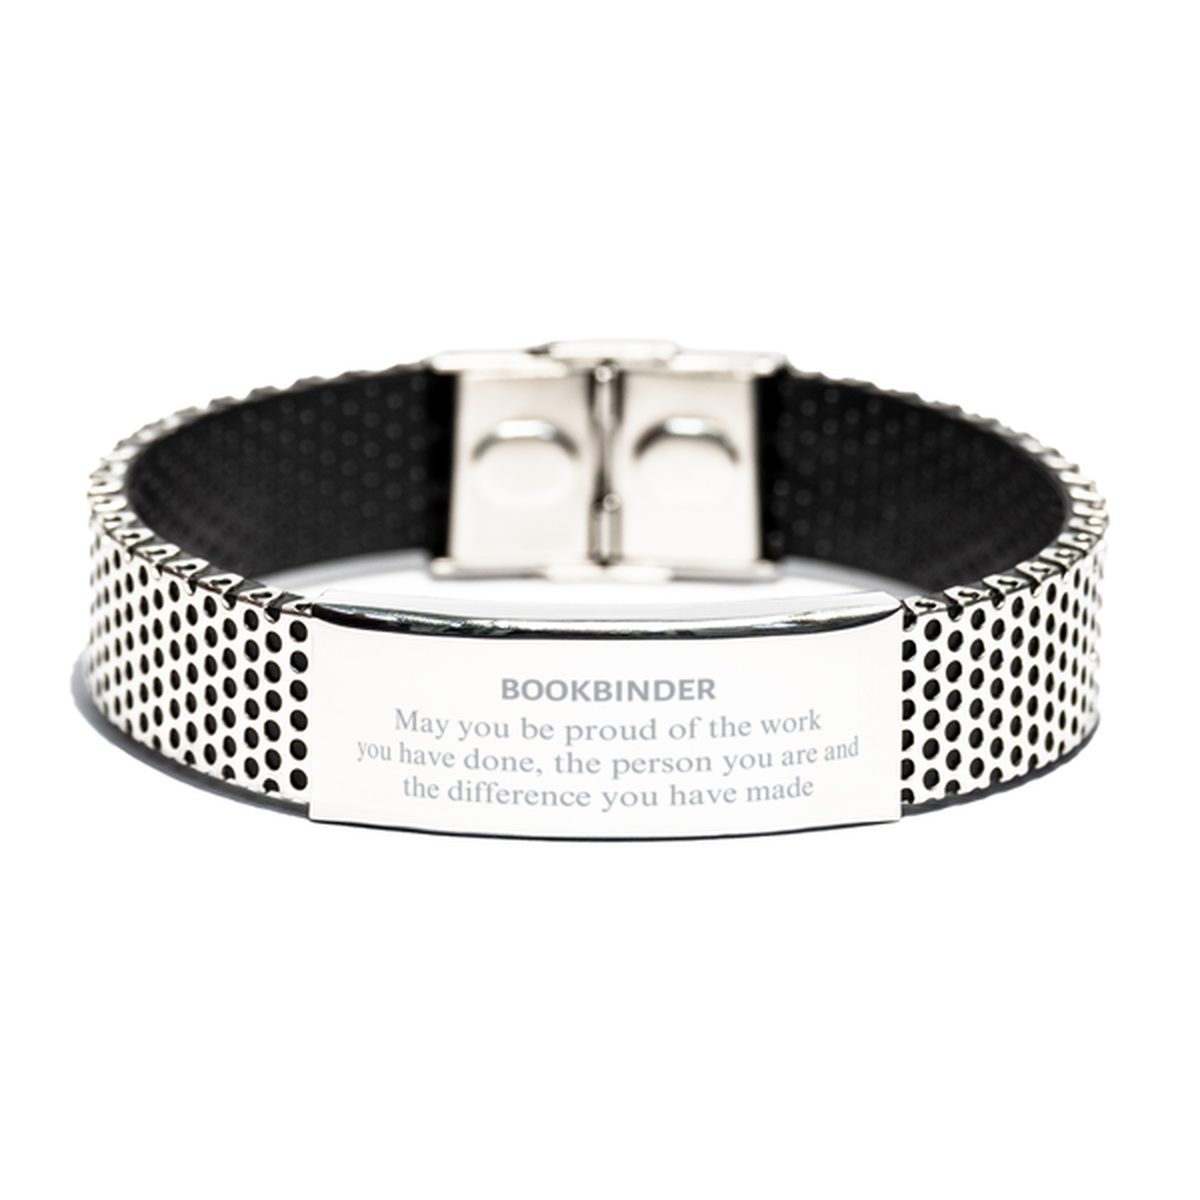 Bookbinder May you be proud of the work you have done, Retirement Bookbinder Stainless Steel Bracelet for Colleague Appreciation Gifts Amazing for Bookbinder